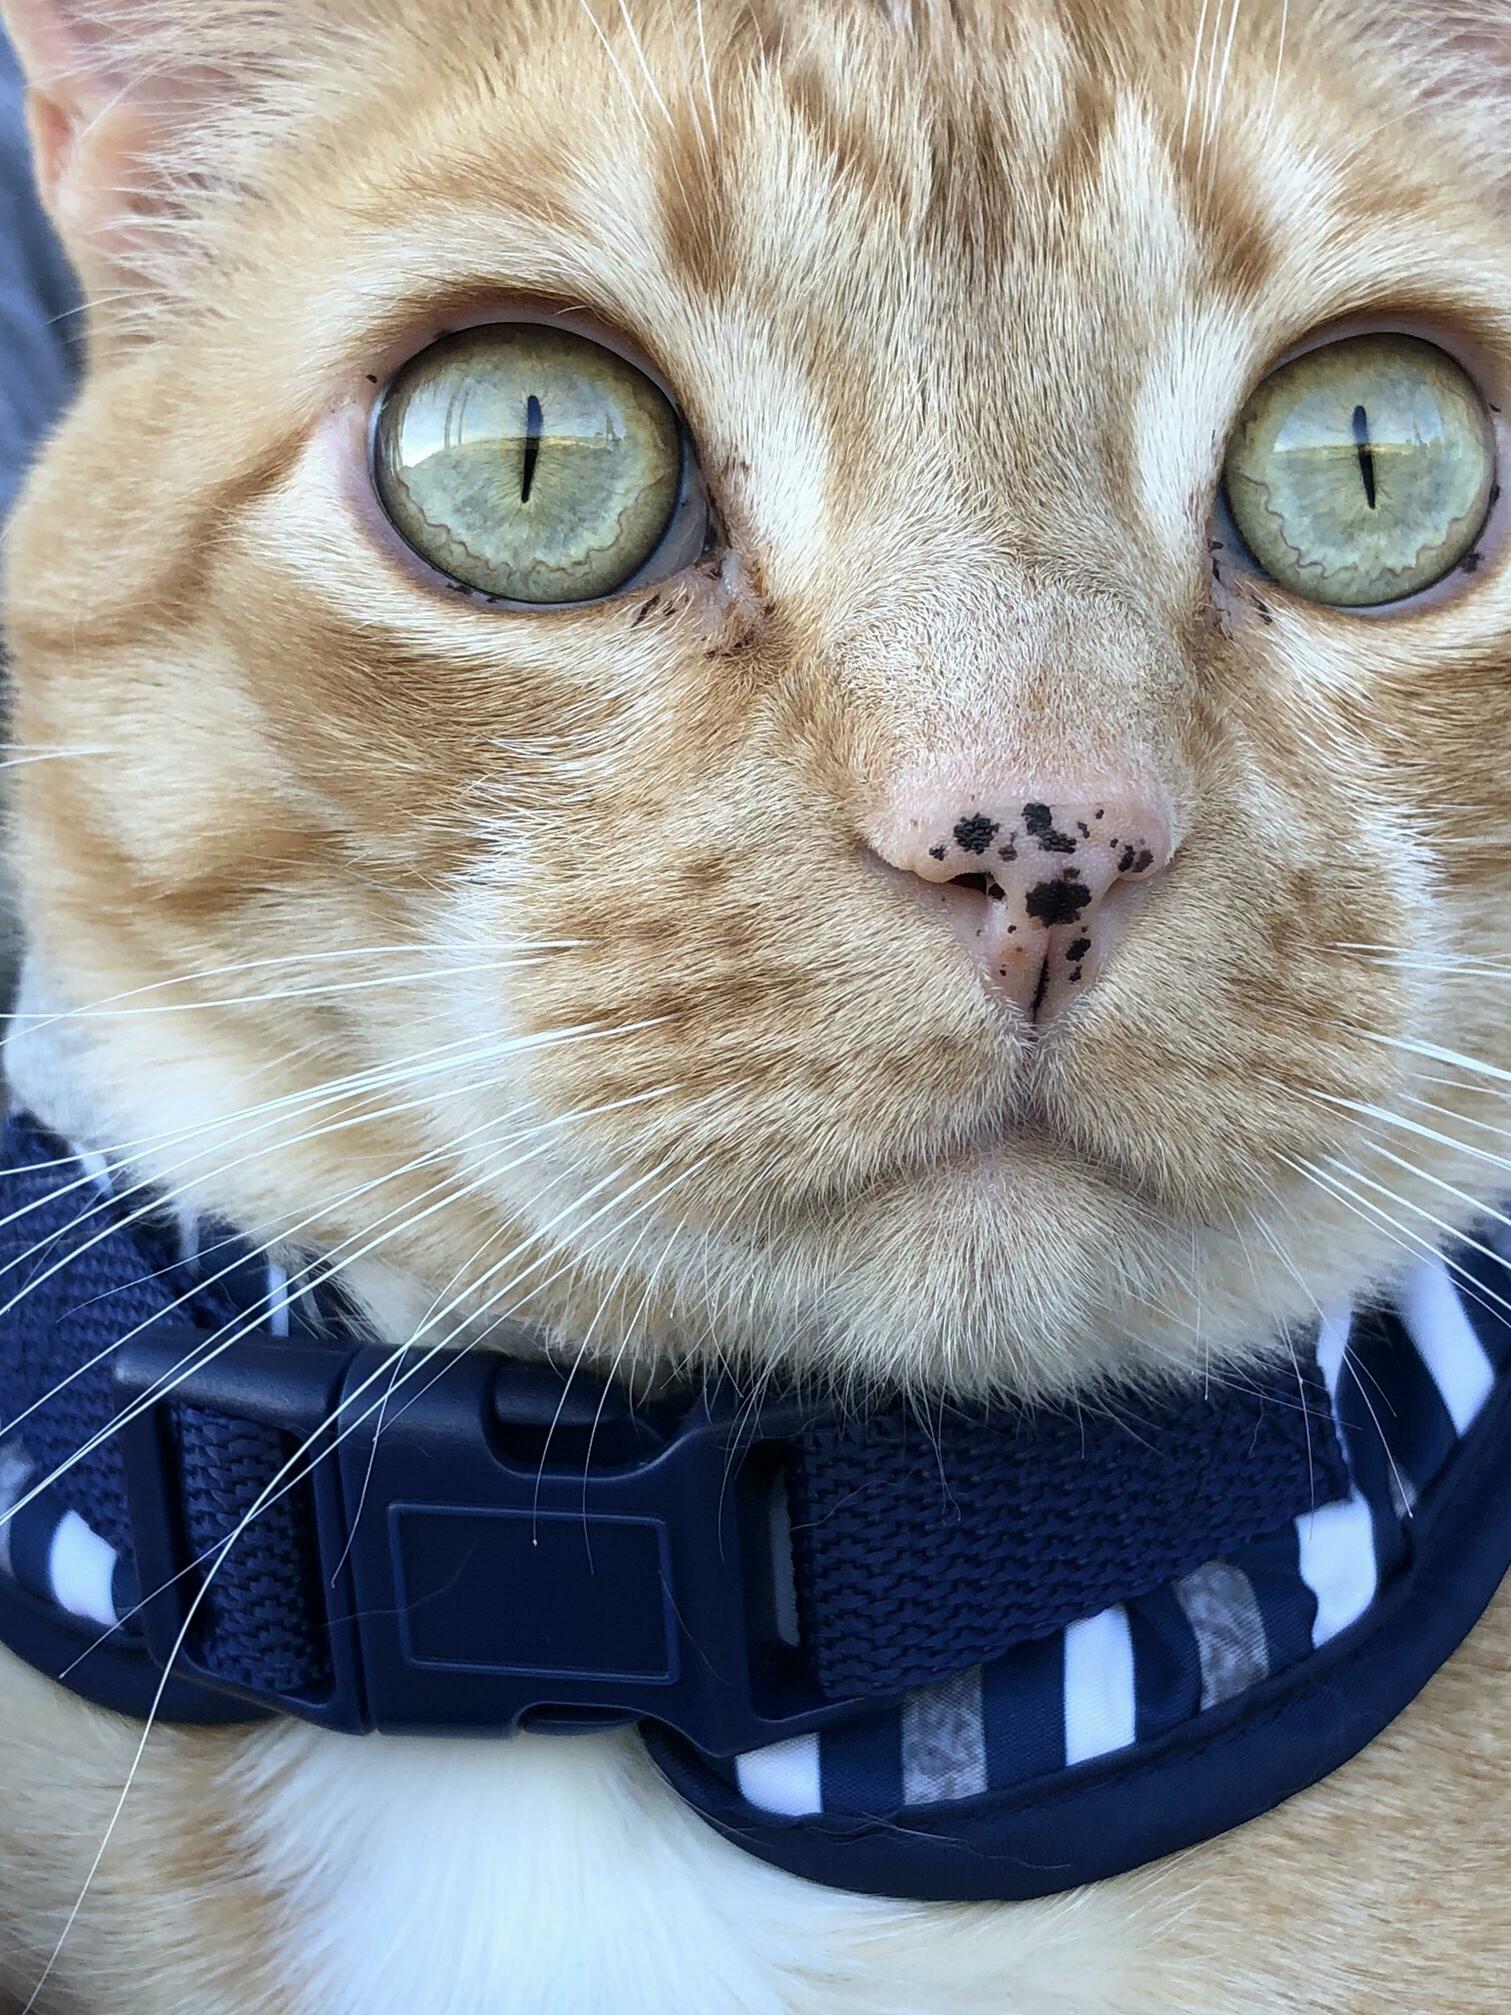 I cant get enough of his freckles and big green eyes.